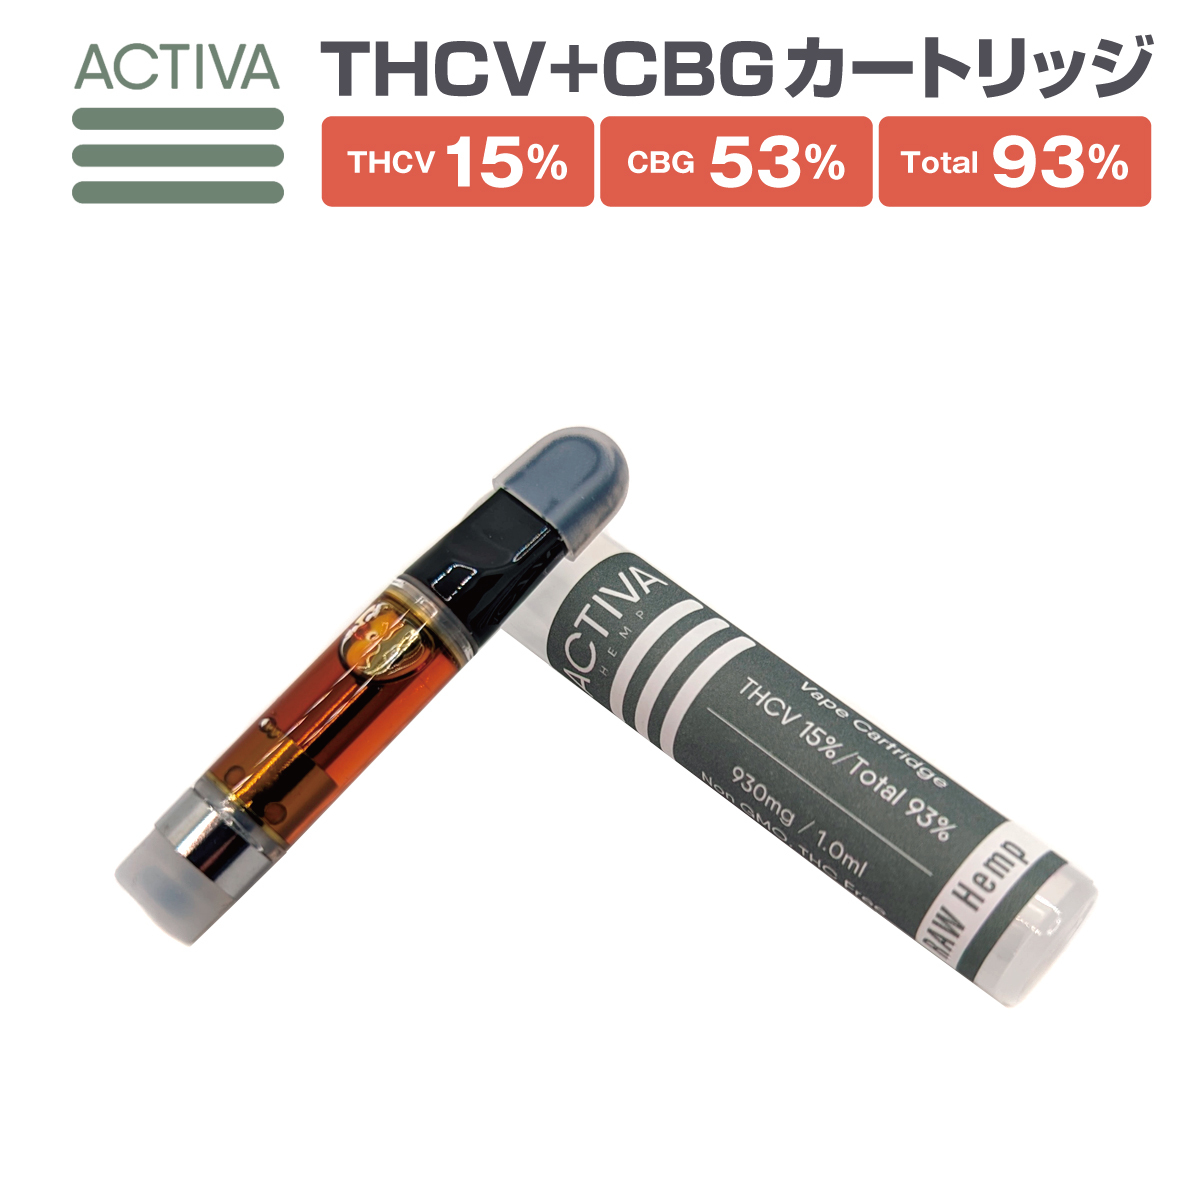 HAPPYリキッド1本 1.0ml CRD CRDP CRD CBN 68